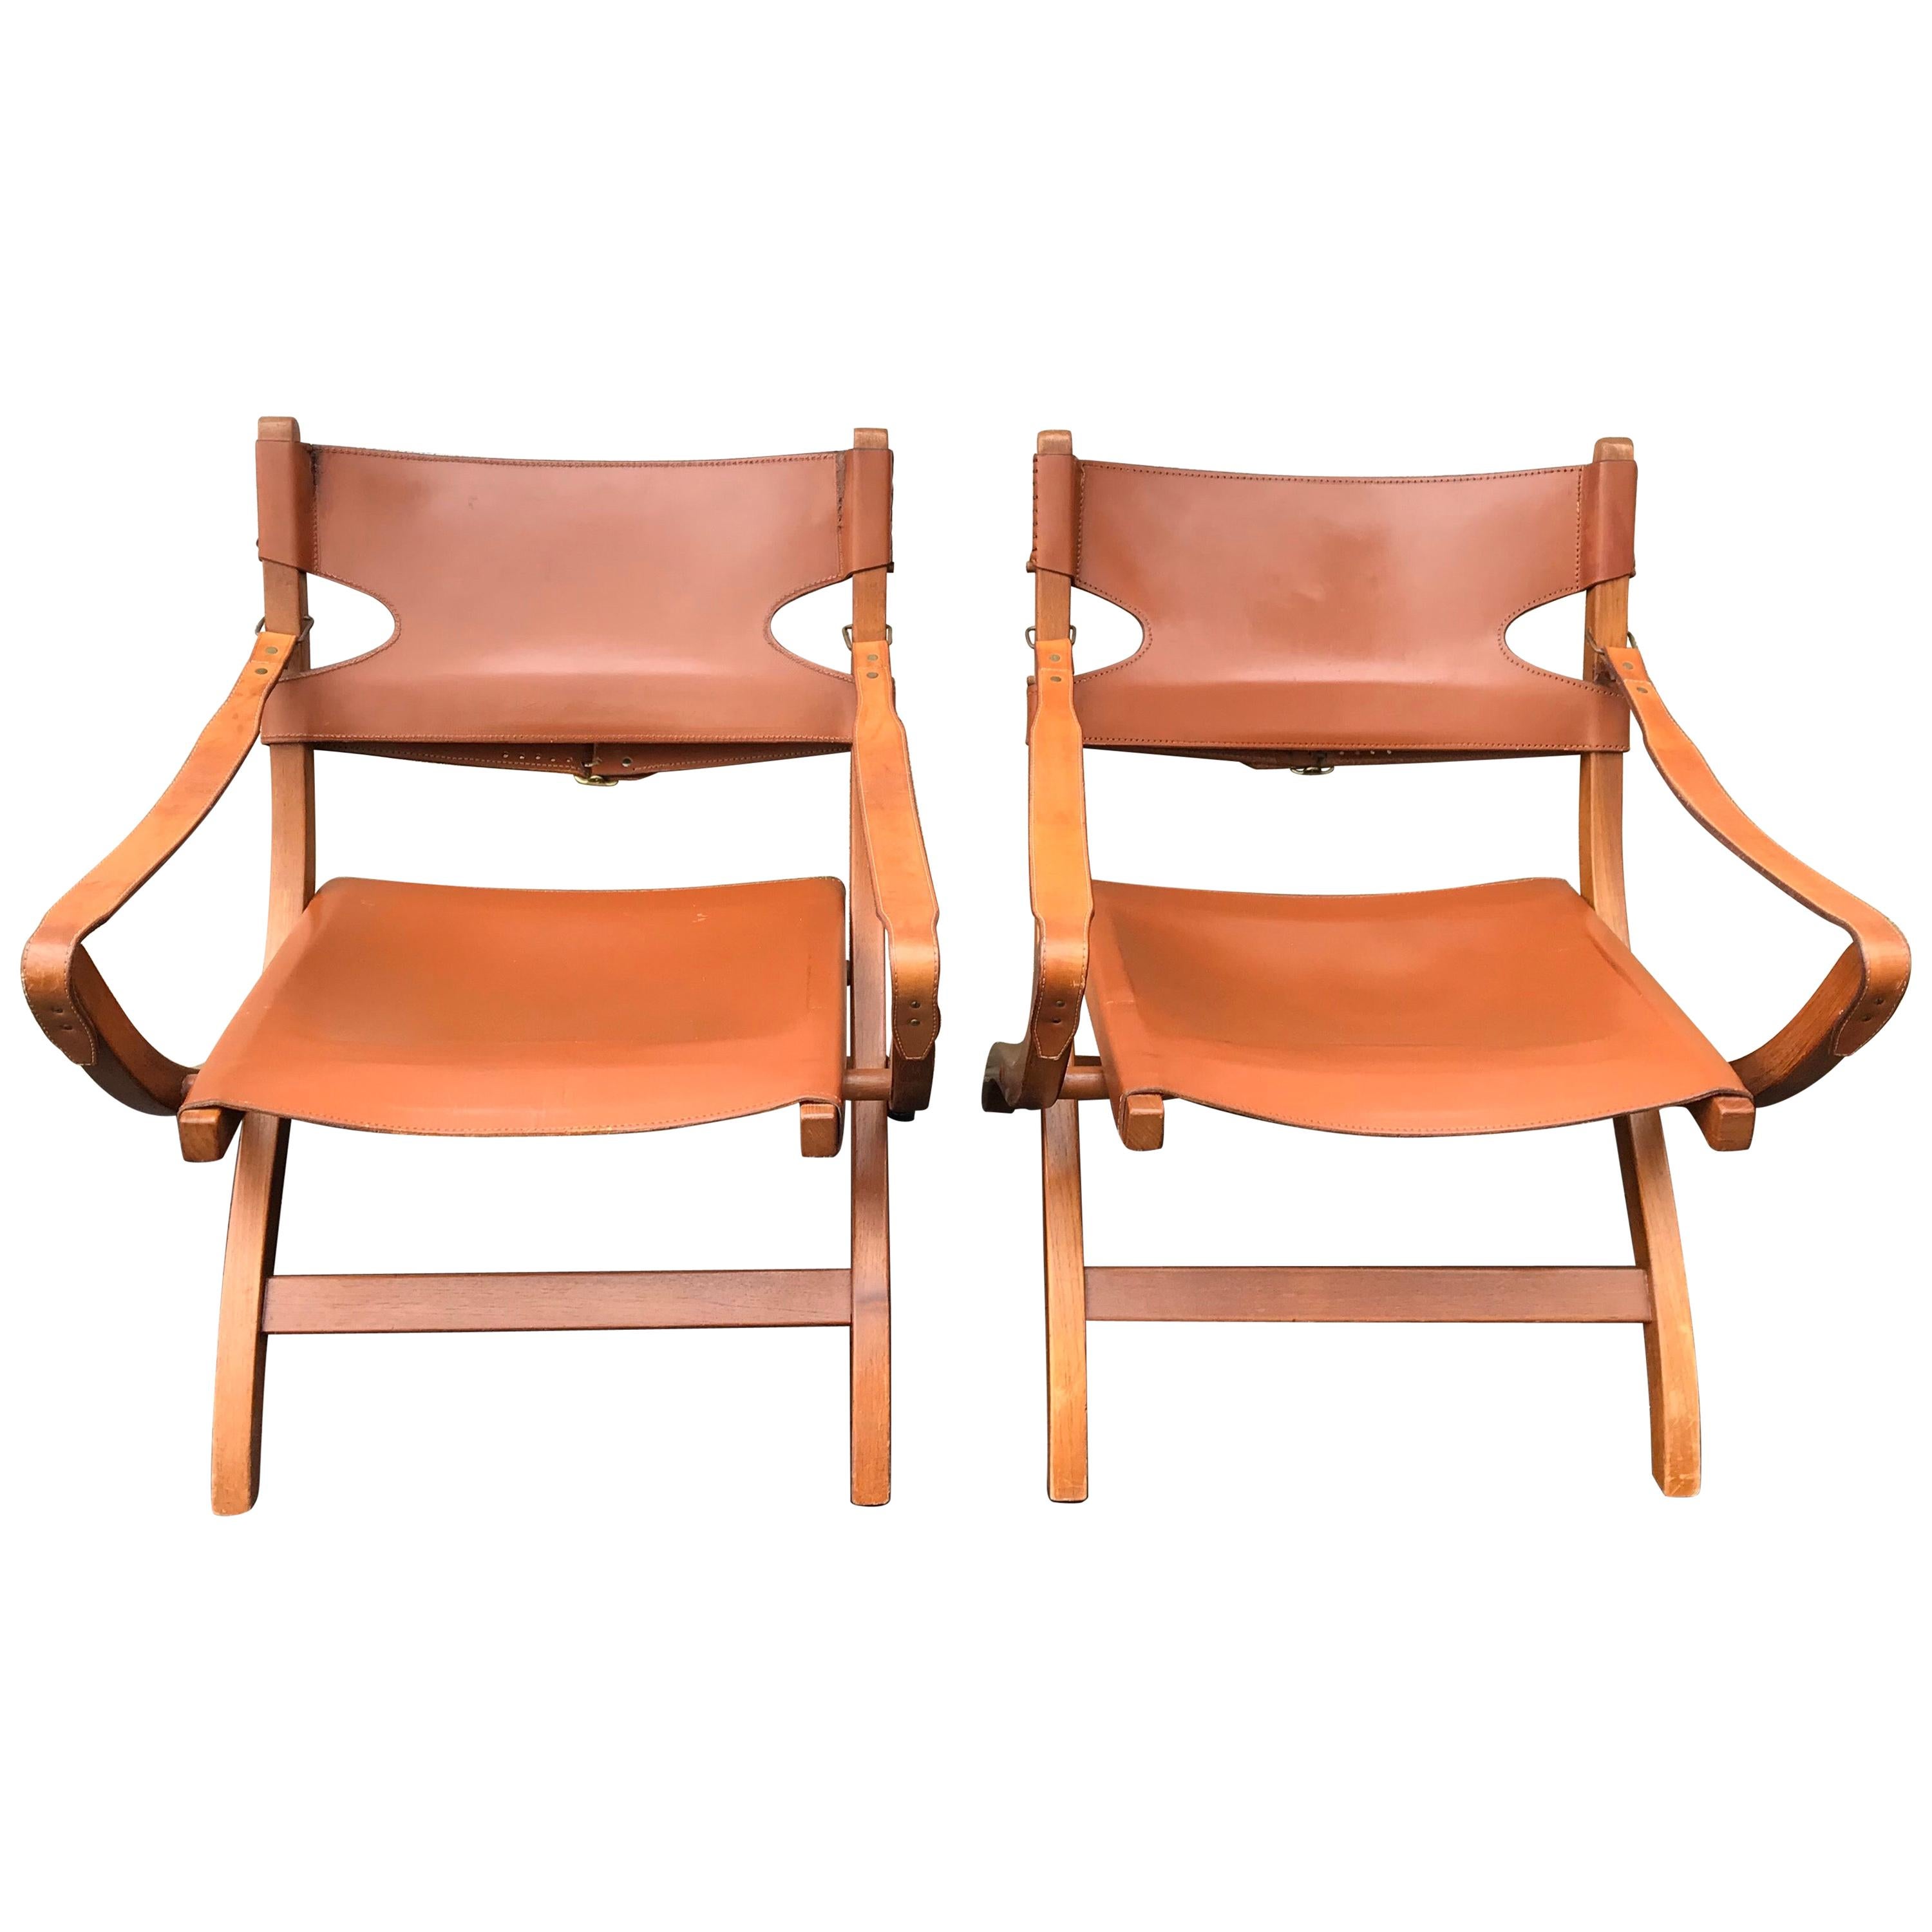 Pair of Poul Hundevad Campaign X-Leather Folding Lounge Chairs, Denmark, 1950s